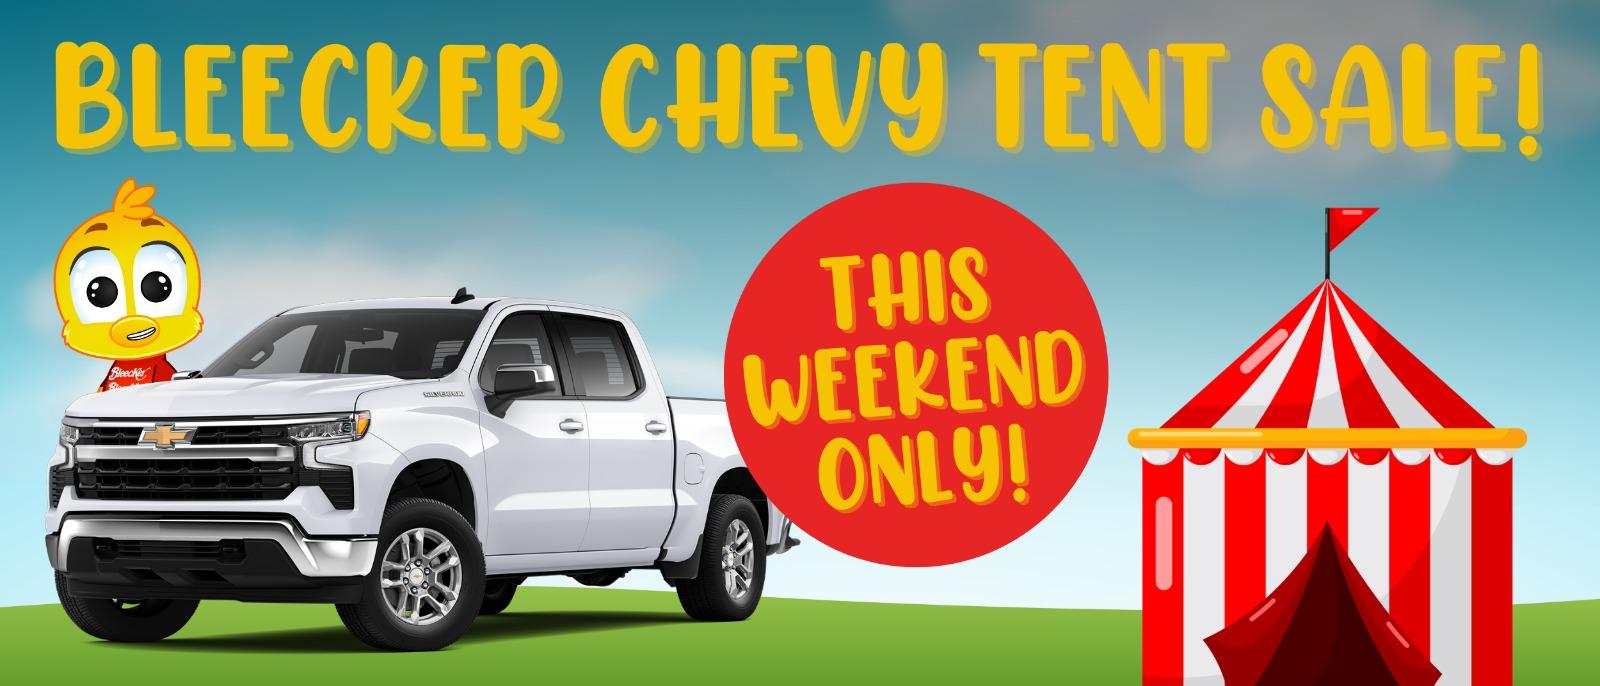 BLEECKER CHEVY TENT SALE! This weekend